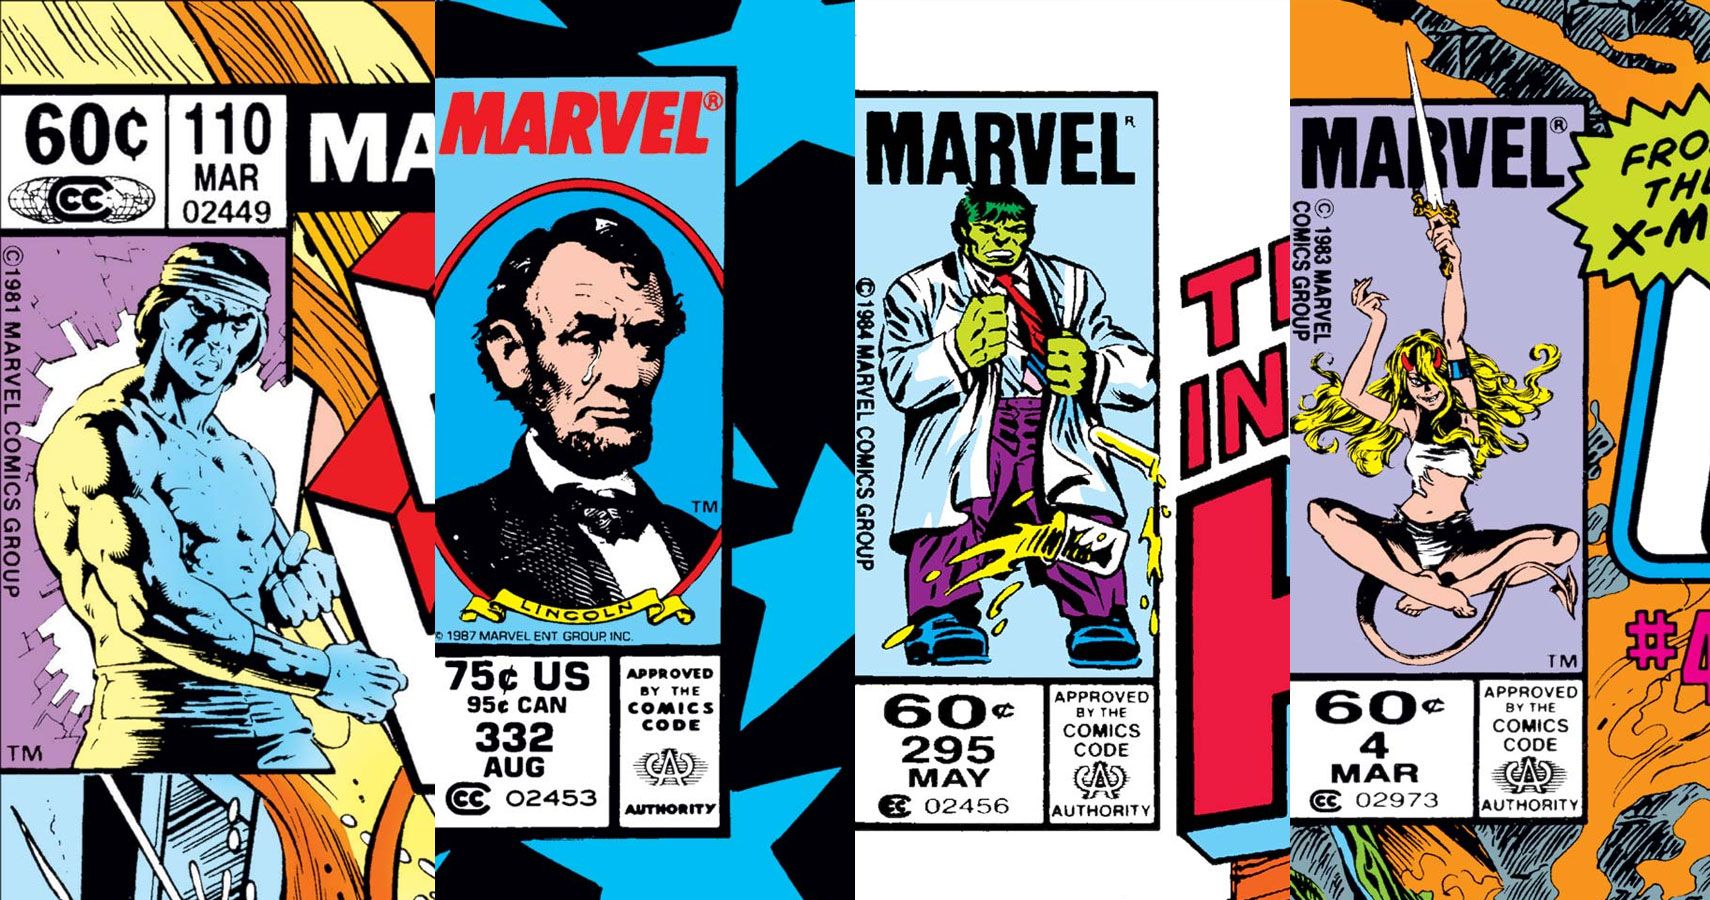 Marvel: The 10 Best Uses of the Iconic Marvel Corner Box